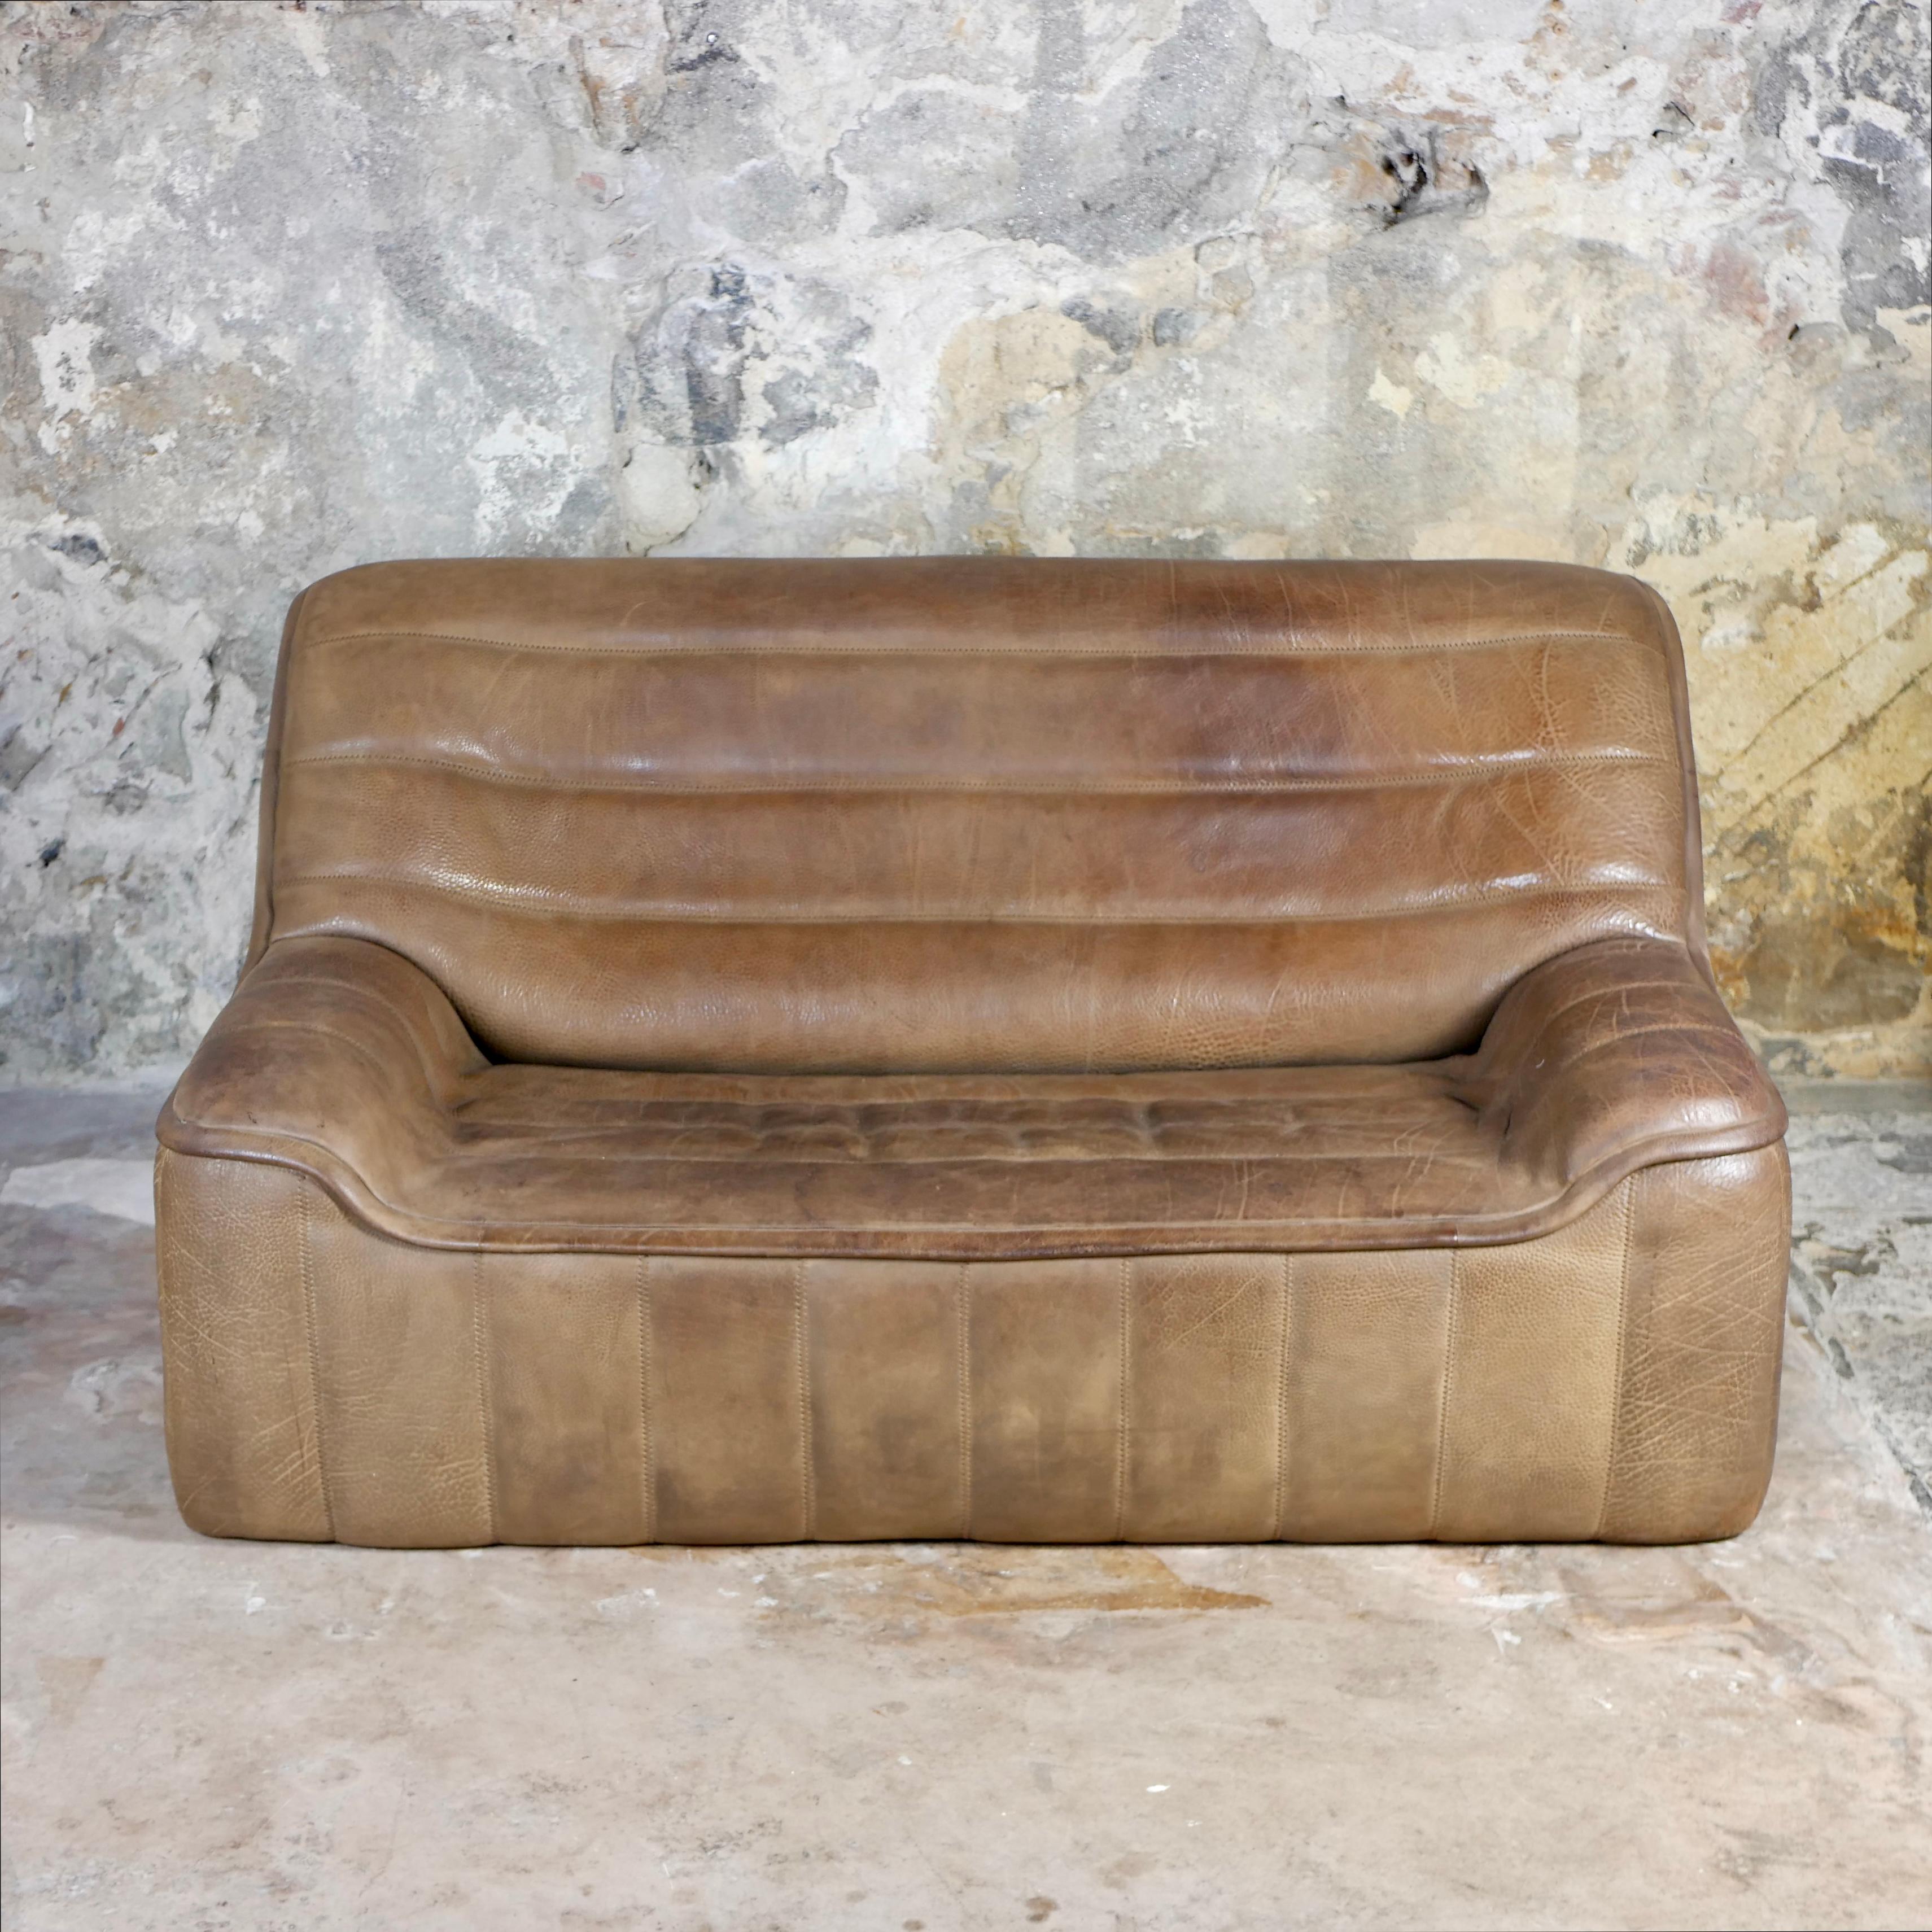 Beautiful De Sede sofa, model DS-84, in taupe buffalo leather, made in Switzerland in the 1970s.
Nice stitching details, nice patina and leather grain.
De Sede is known for its high quality leather furniture.
Overall good condition, traces of time